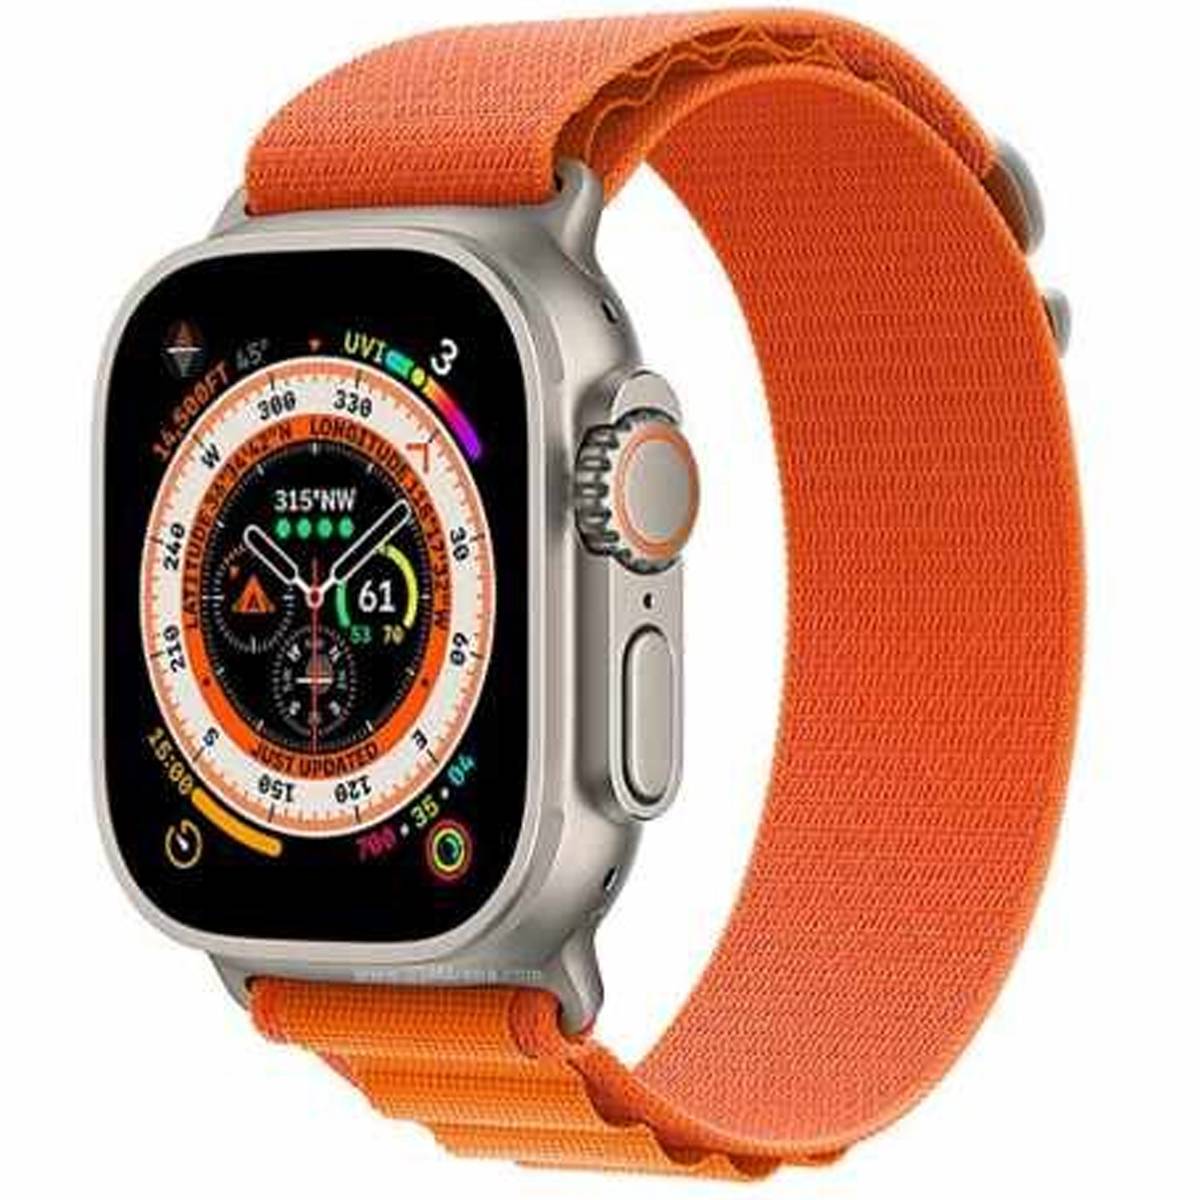 Y10 Ultra Smart Watch With 4 Straps